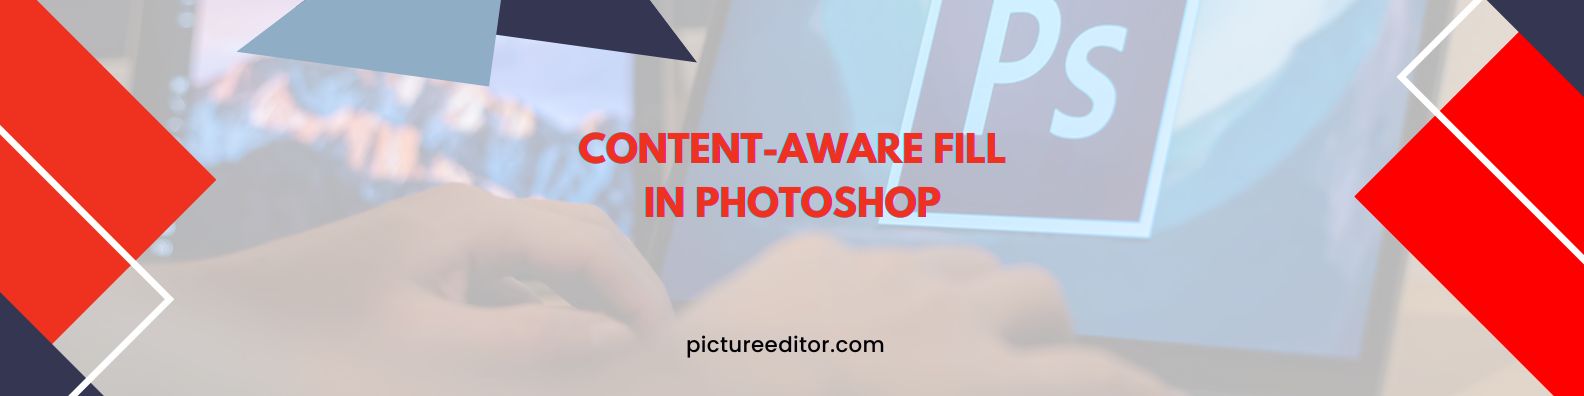 Content Aware Fill In Photoshop Pictureeditor